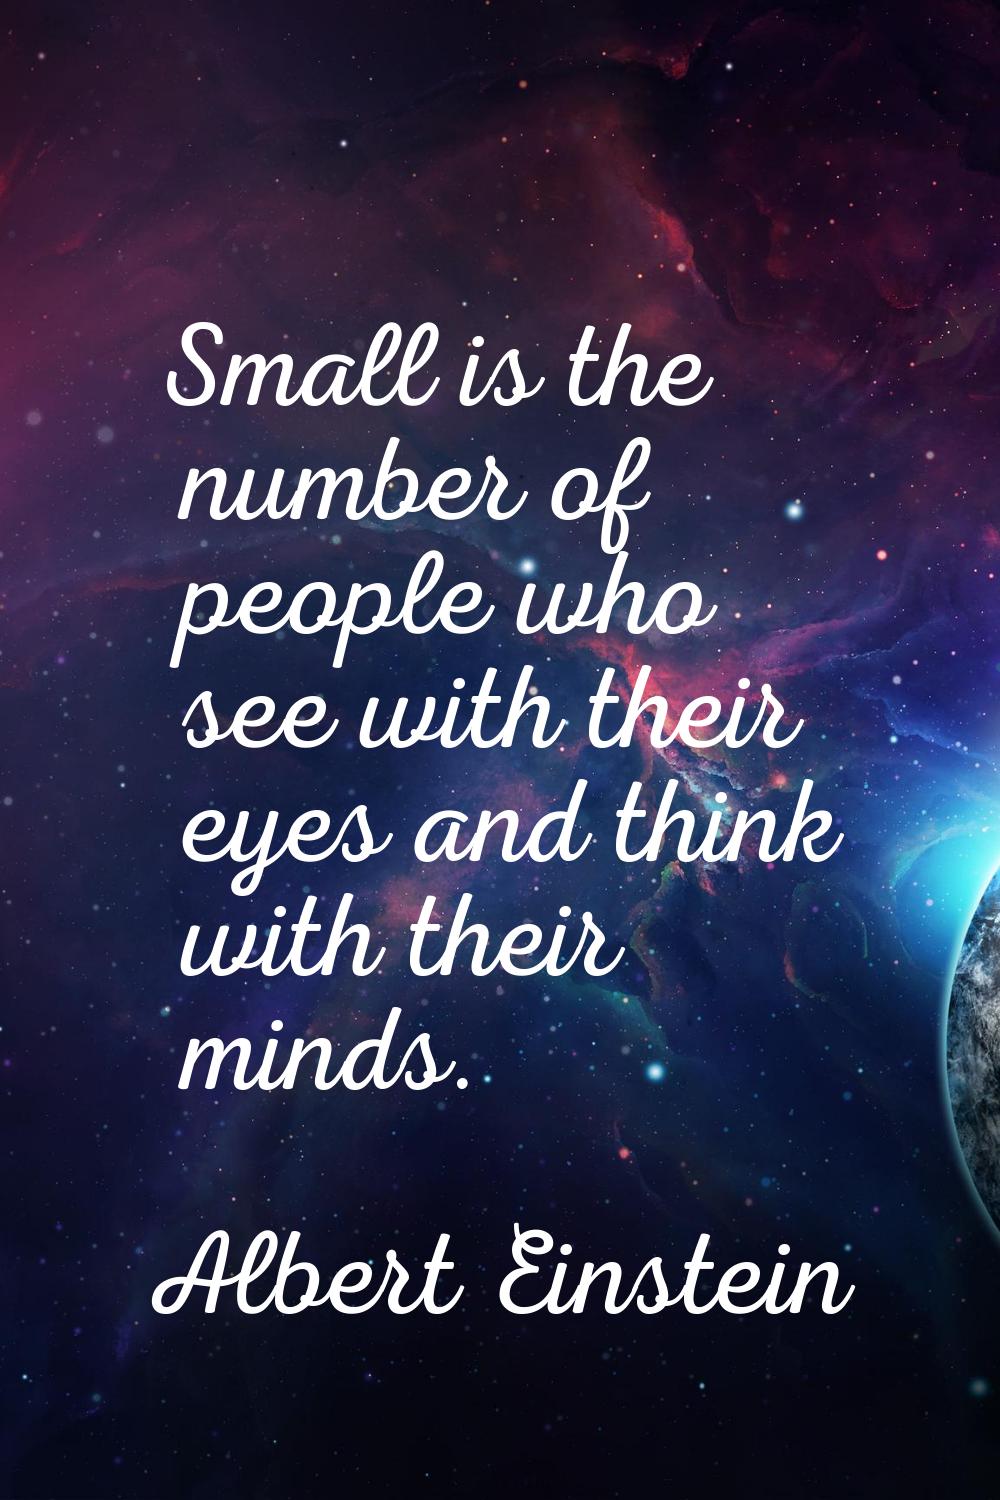 Small is the number of people who see with their eyes and think with their minds.